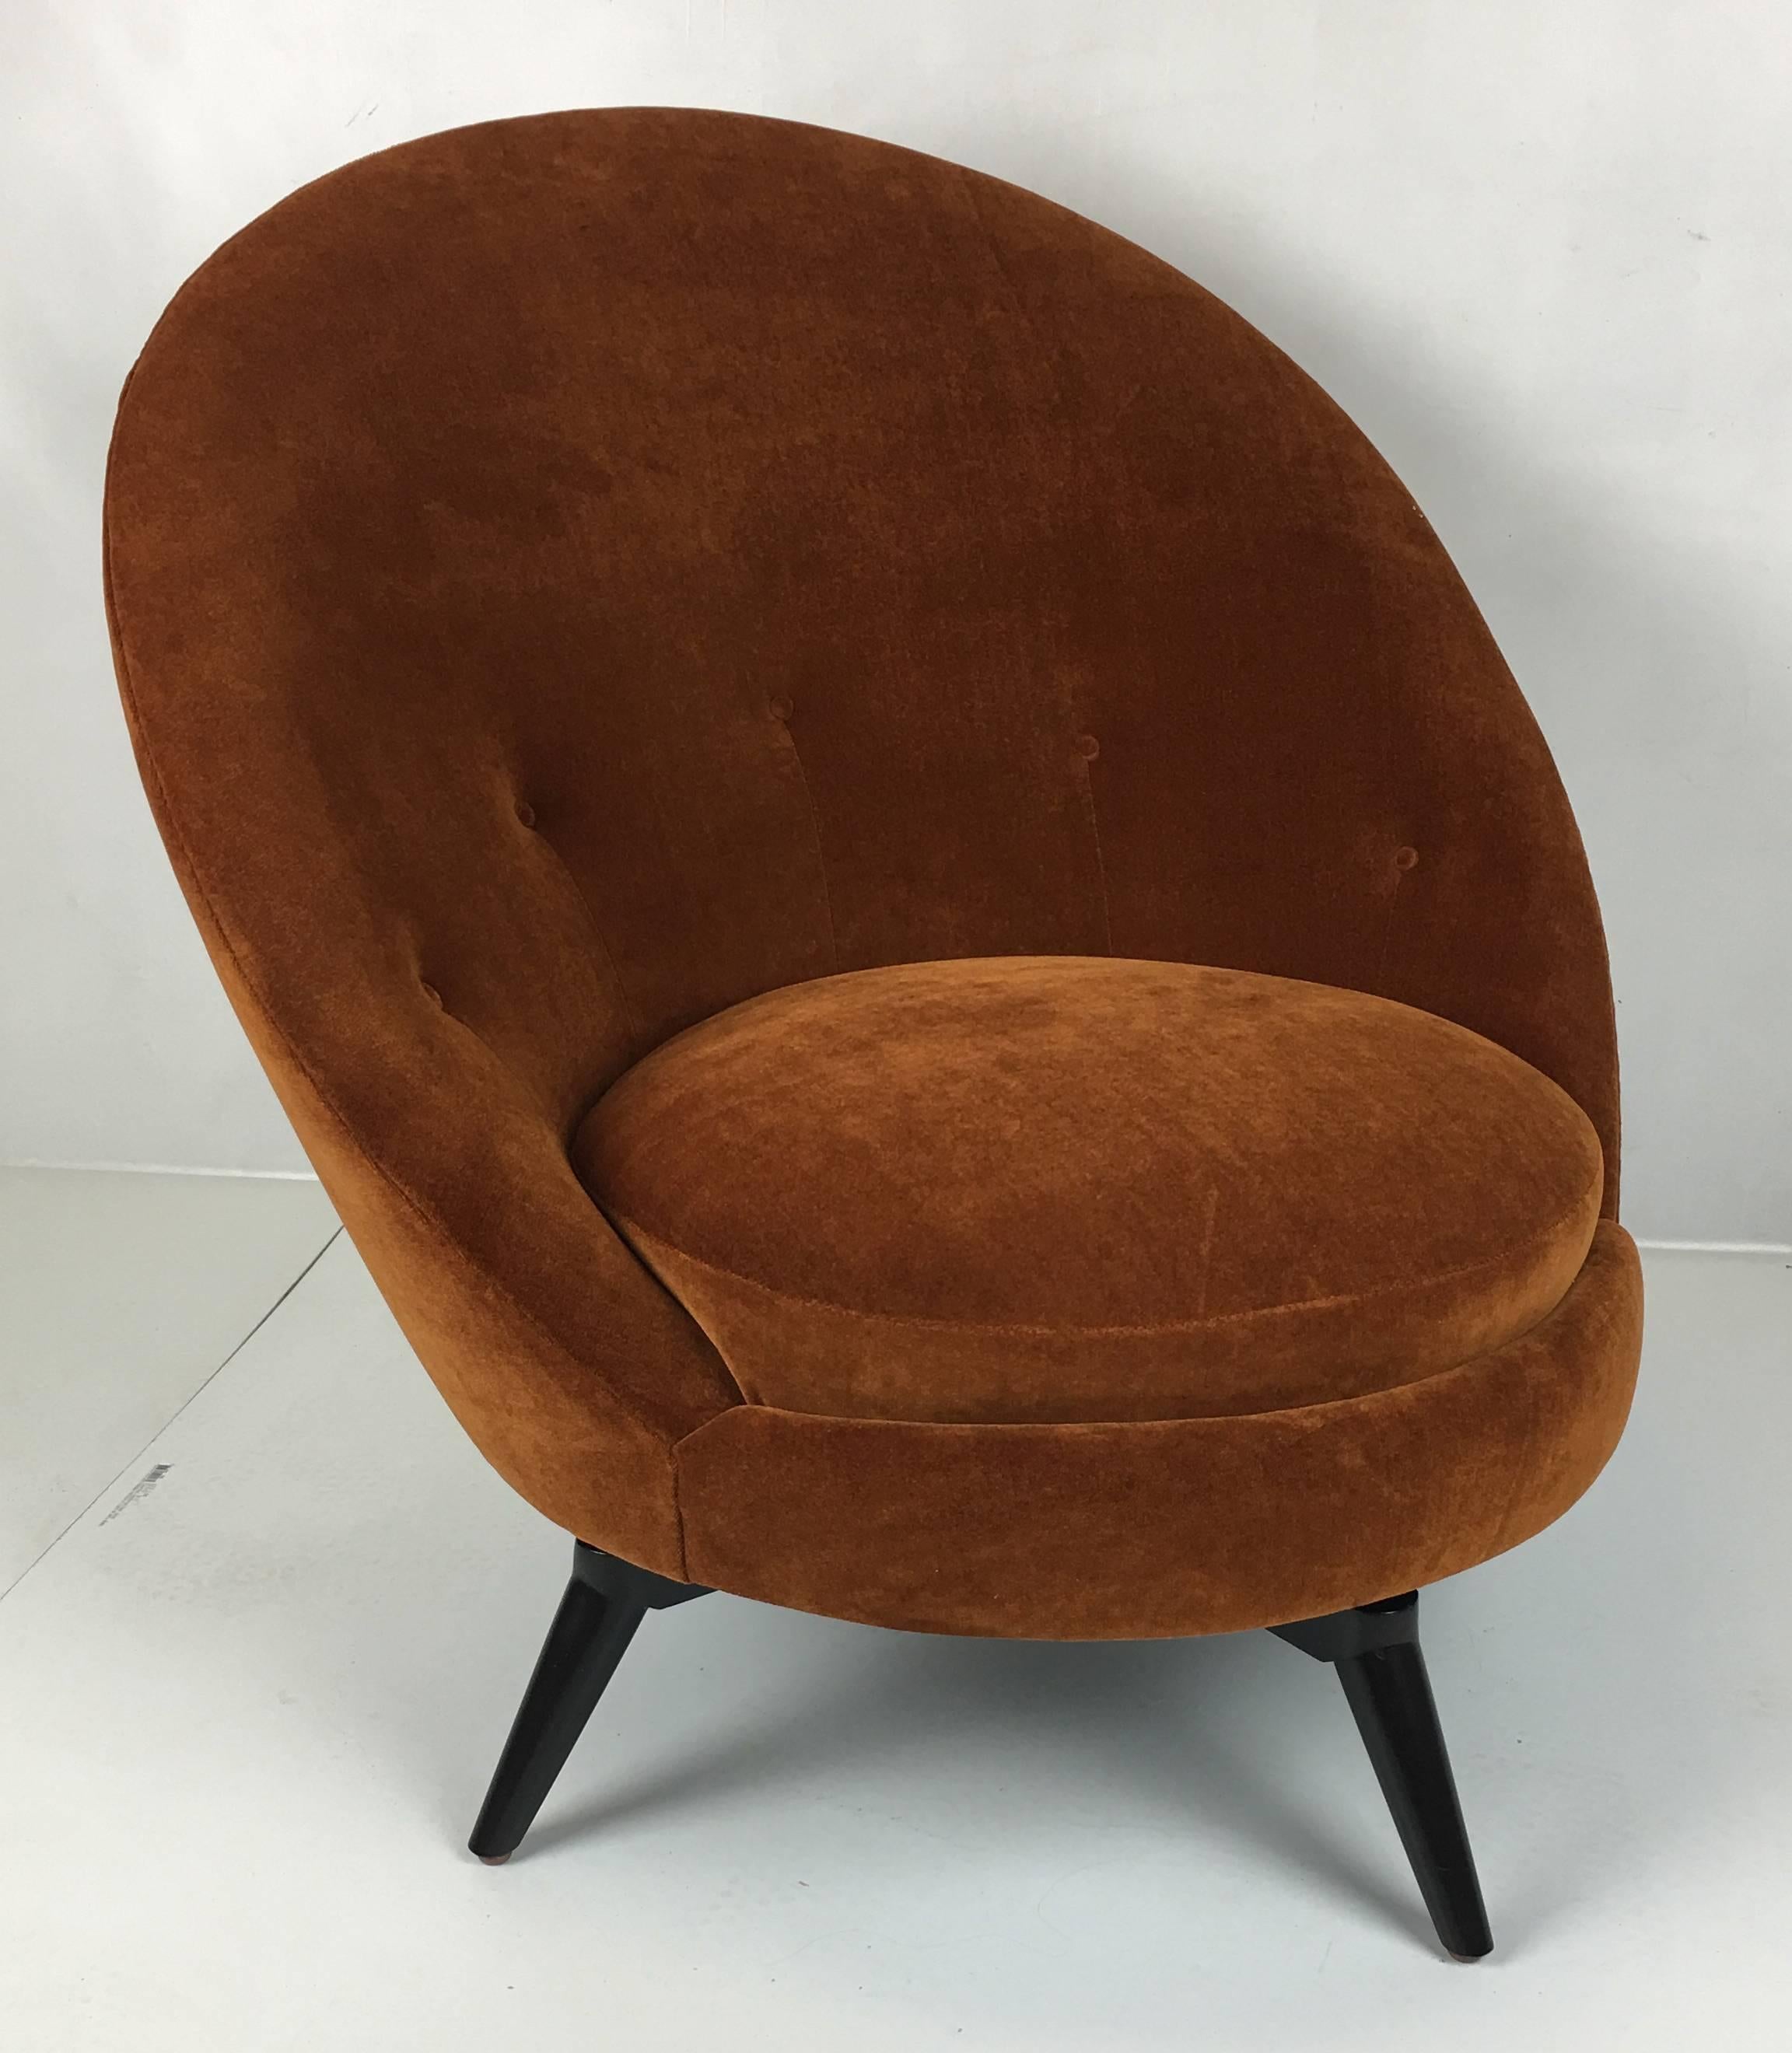 Royere style Egg Chair